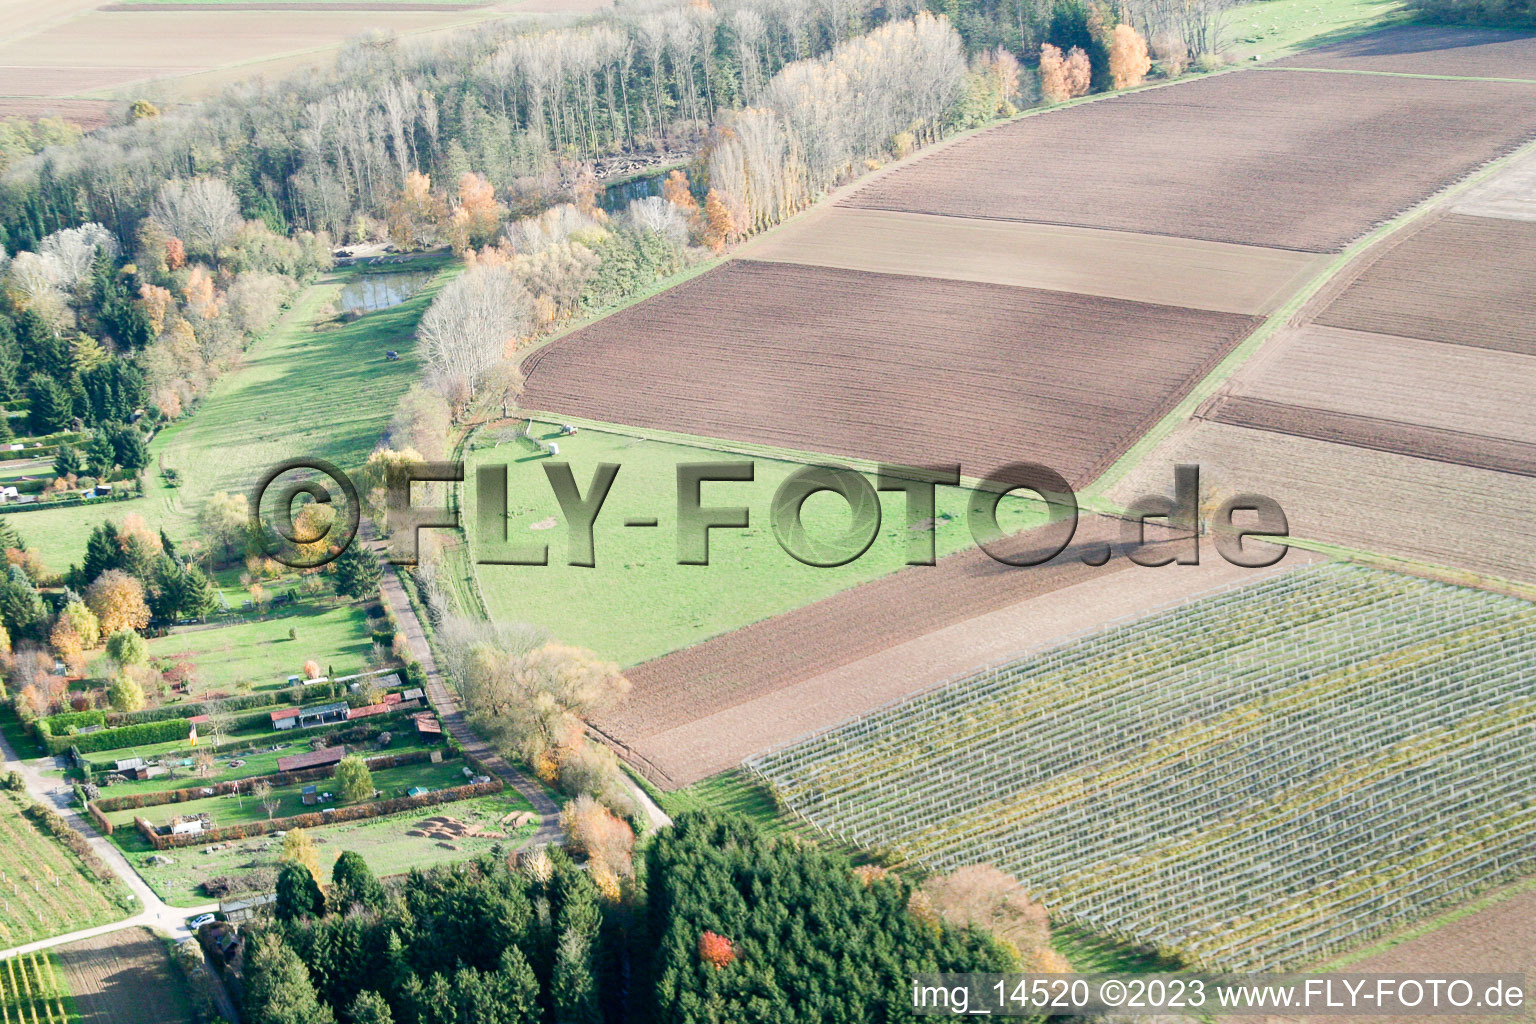 At the fisherman's hut in Insheim in the state Rhineland-Palatinate, Germany seen from above